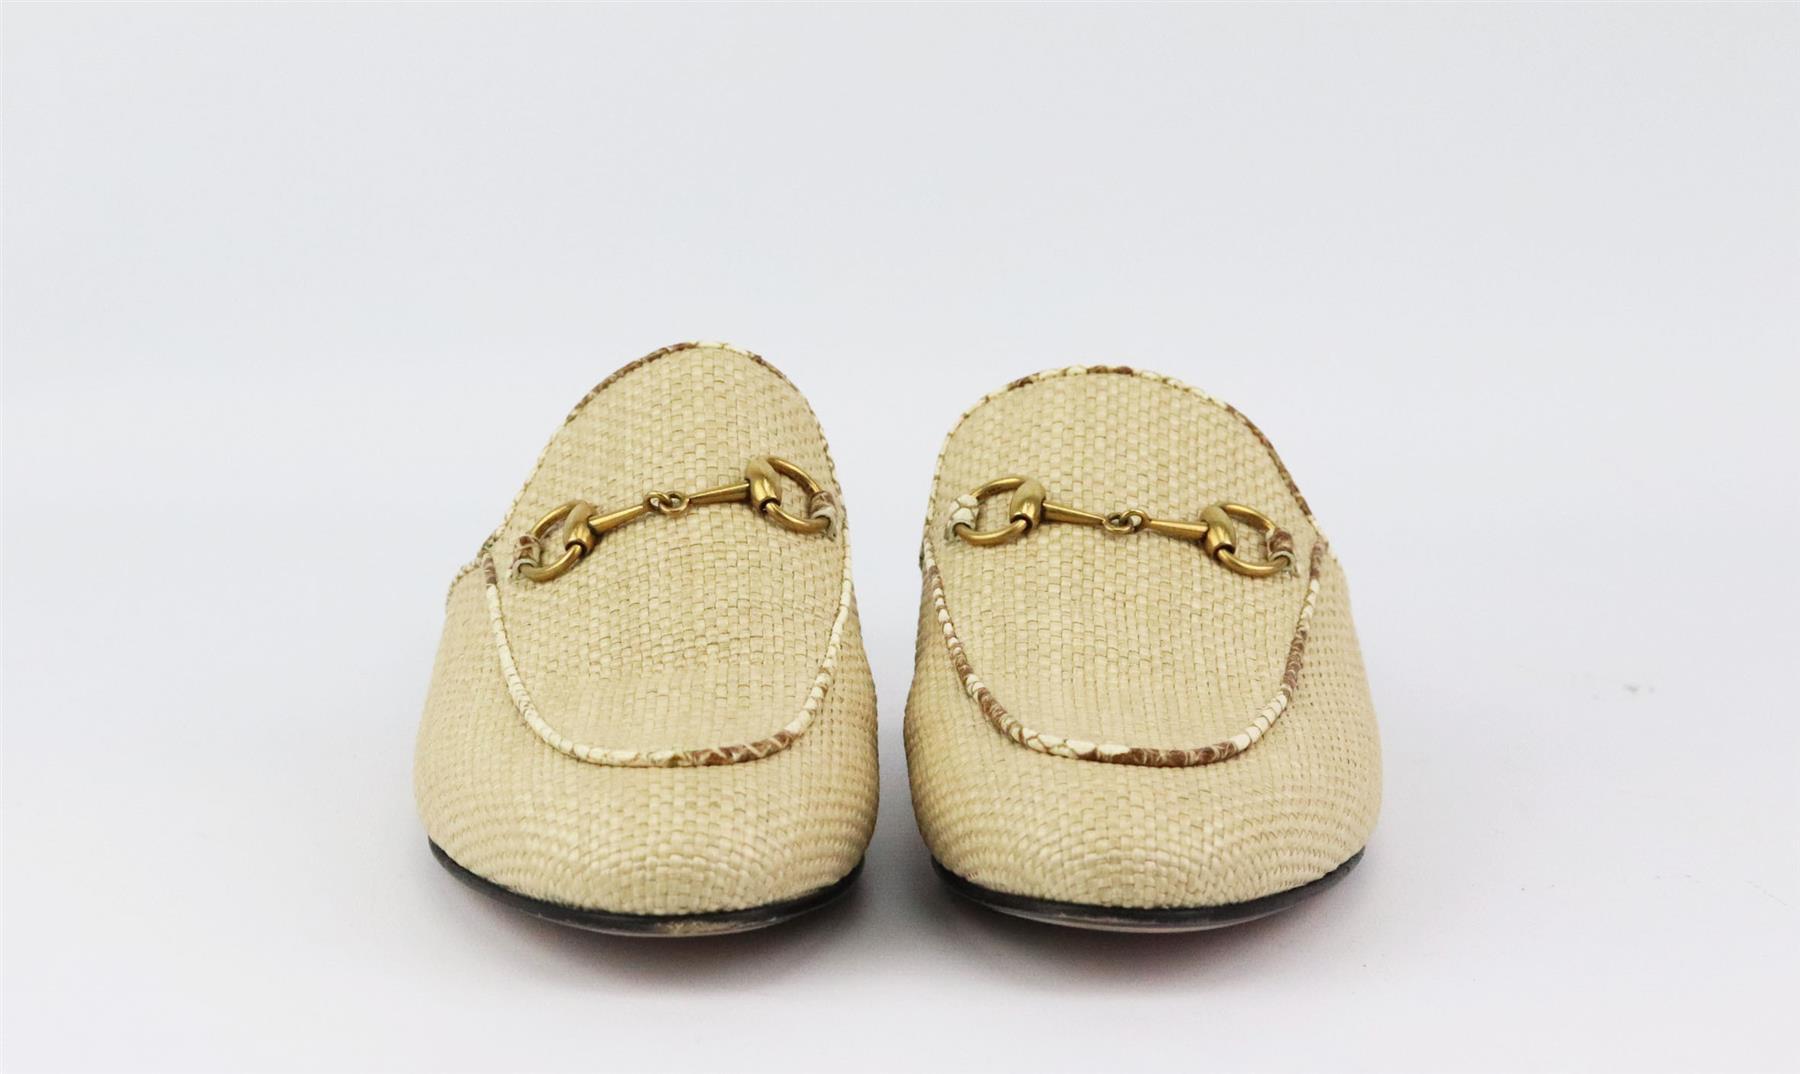 These ‘Princetown’ slippers are crafted from textured snakeskin trimmed beige woven raffia and are a versatile option for the office or evenings out, the almond-toe pair is adorned with the house's iconic horsebit plaque. Sole measures approximately